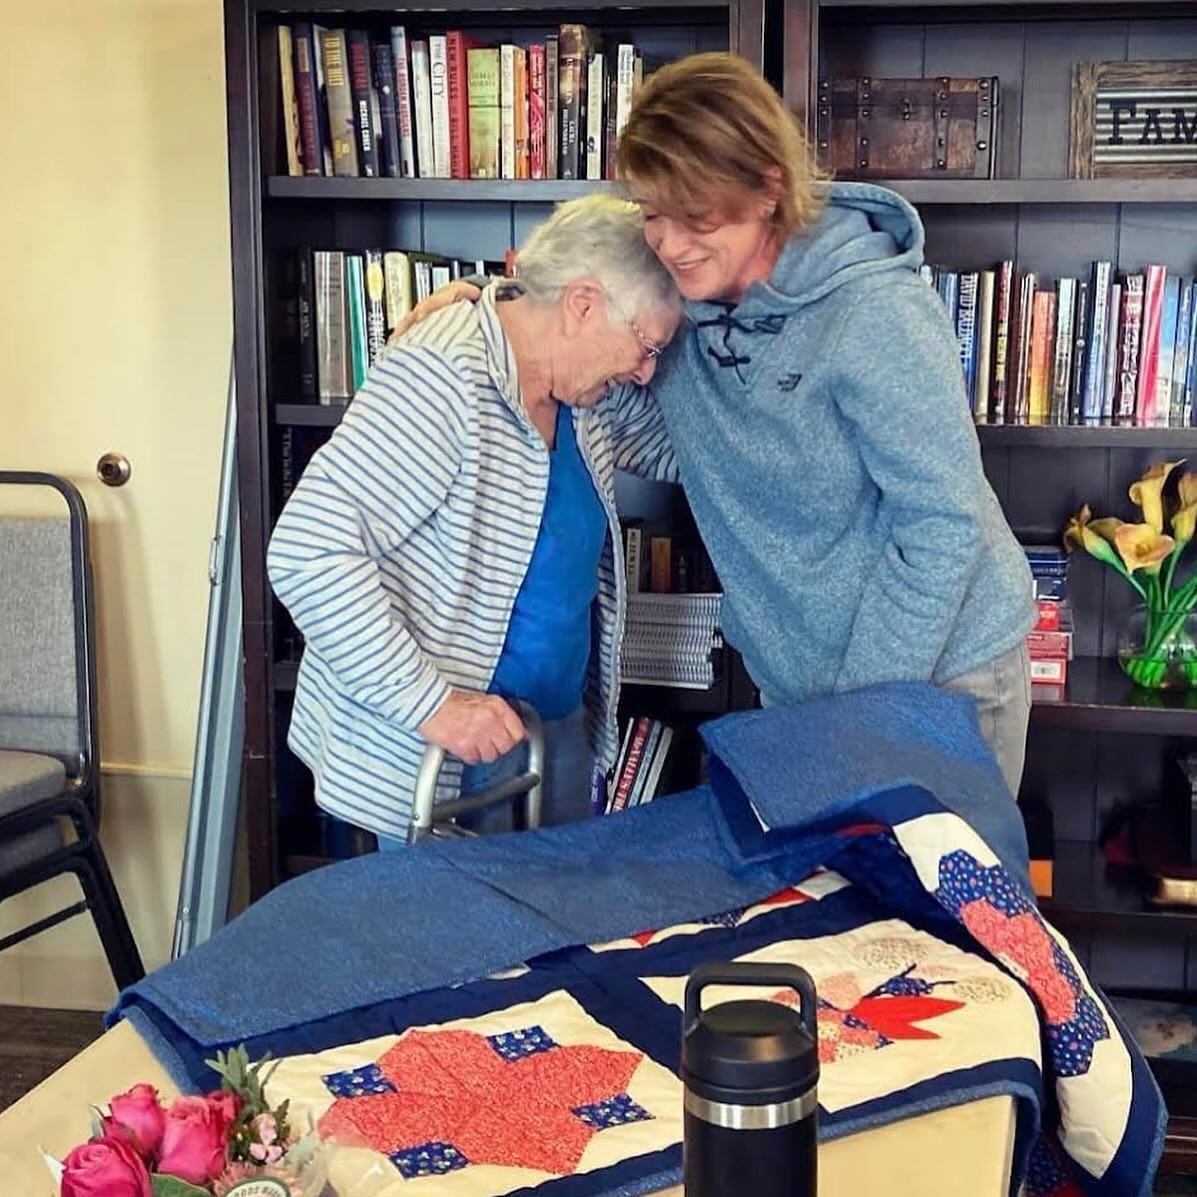 &ldquo;[Penny] is battling dementia, so was unable to complete her beautiful quilt, but she recognized her quilt blocks immediately and cried when she realized that it had been completed. Thank you for allowing me to be part of such a wonderful organ